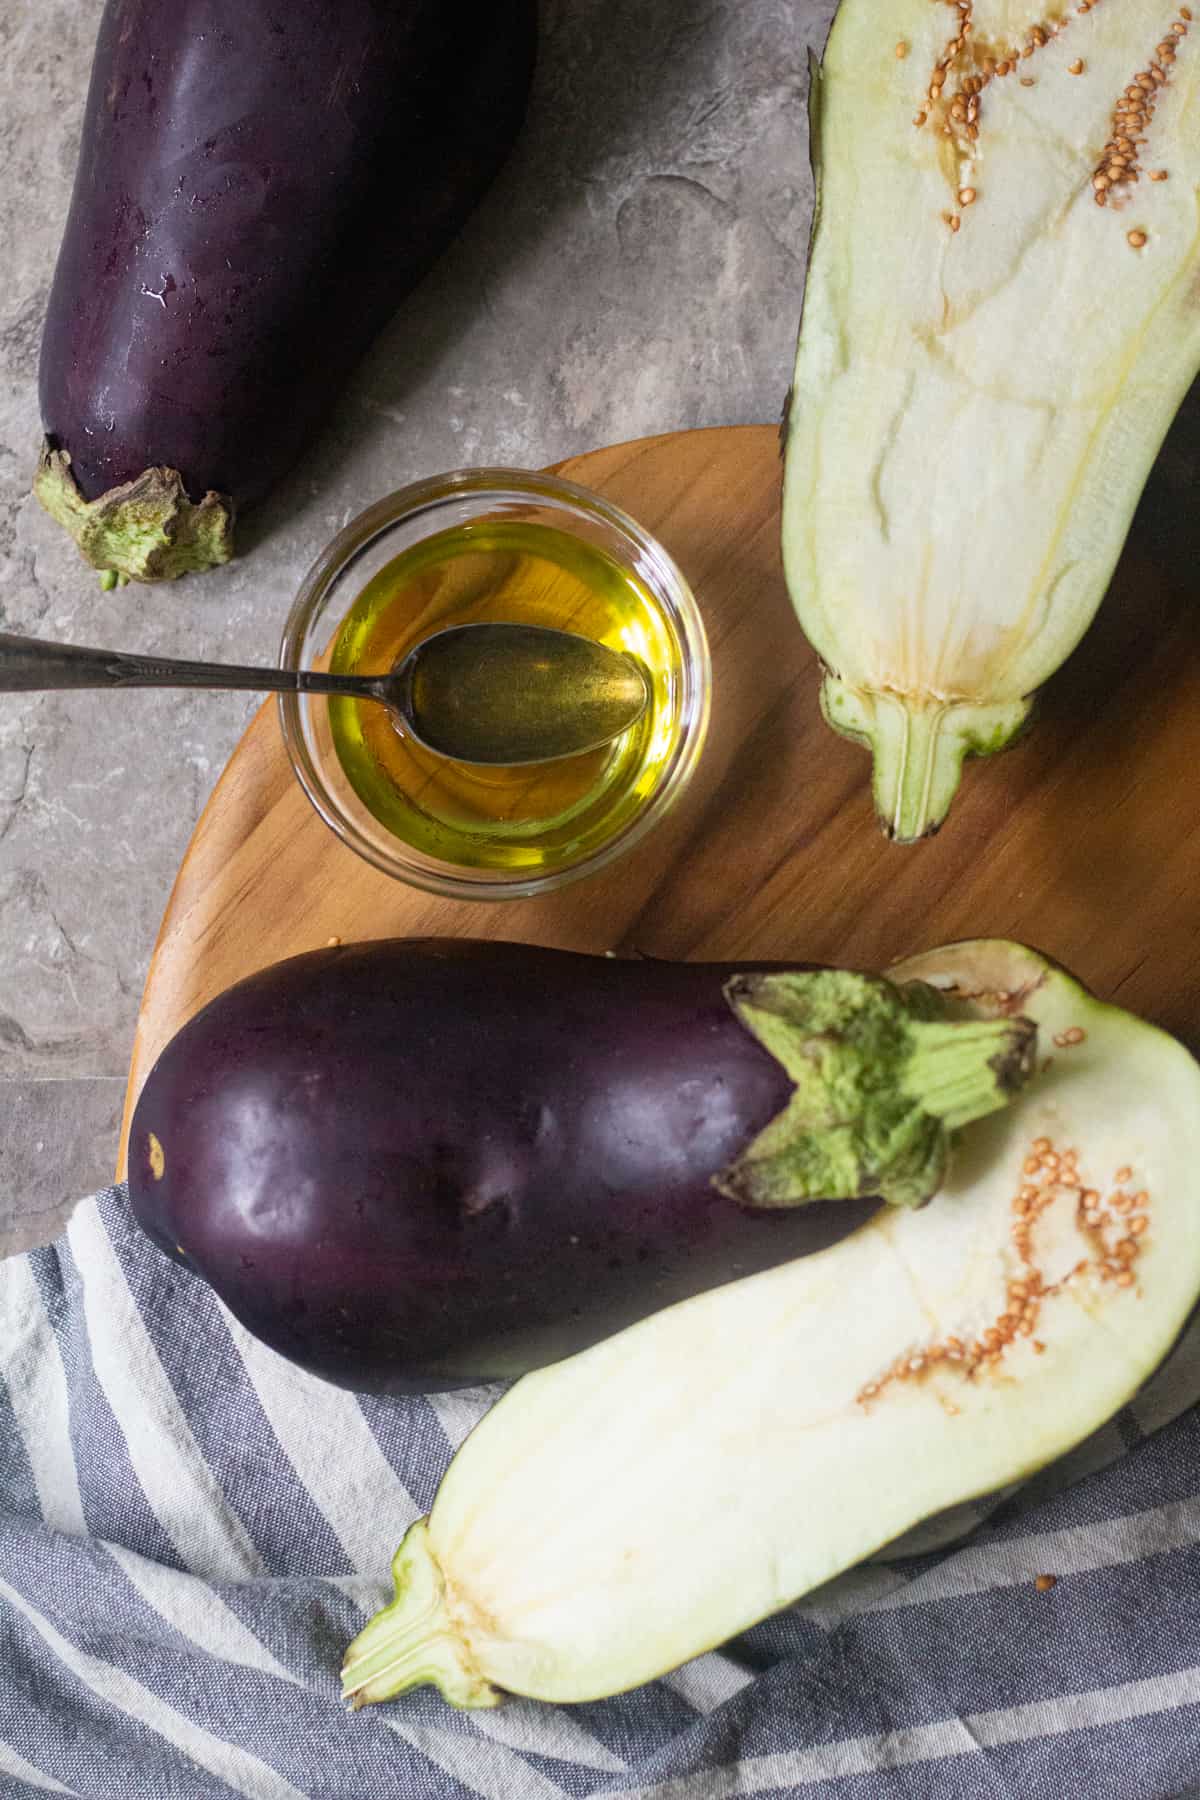 To roast eggplant cut them in half and brush with olive oil. 